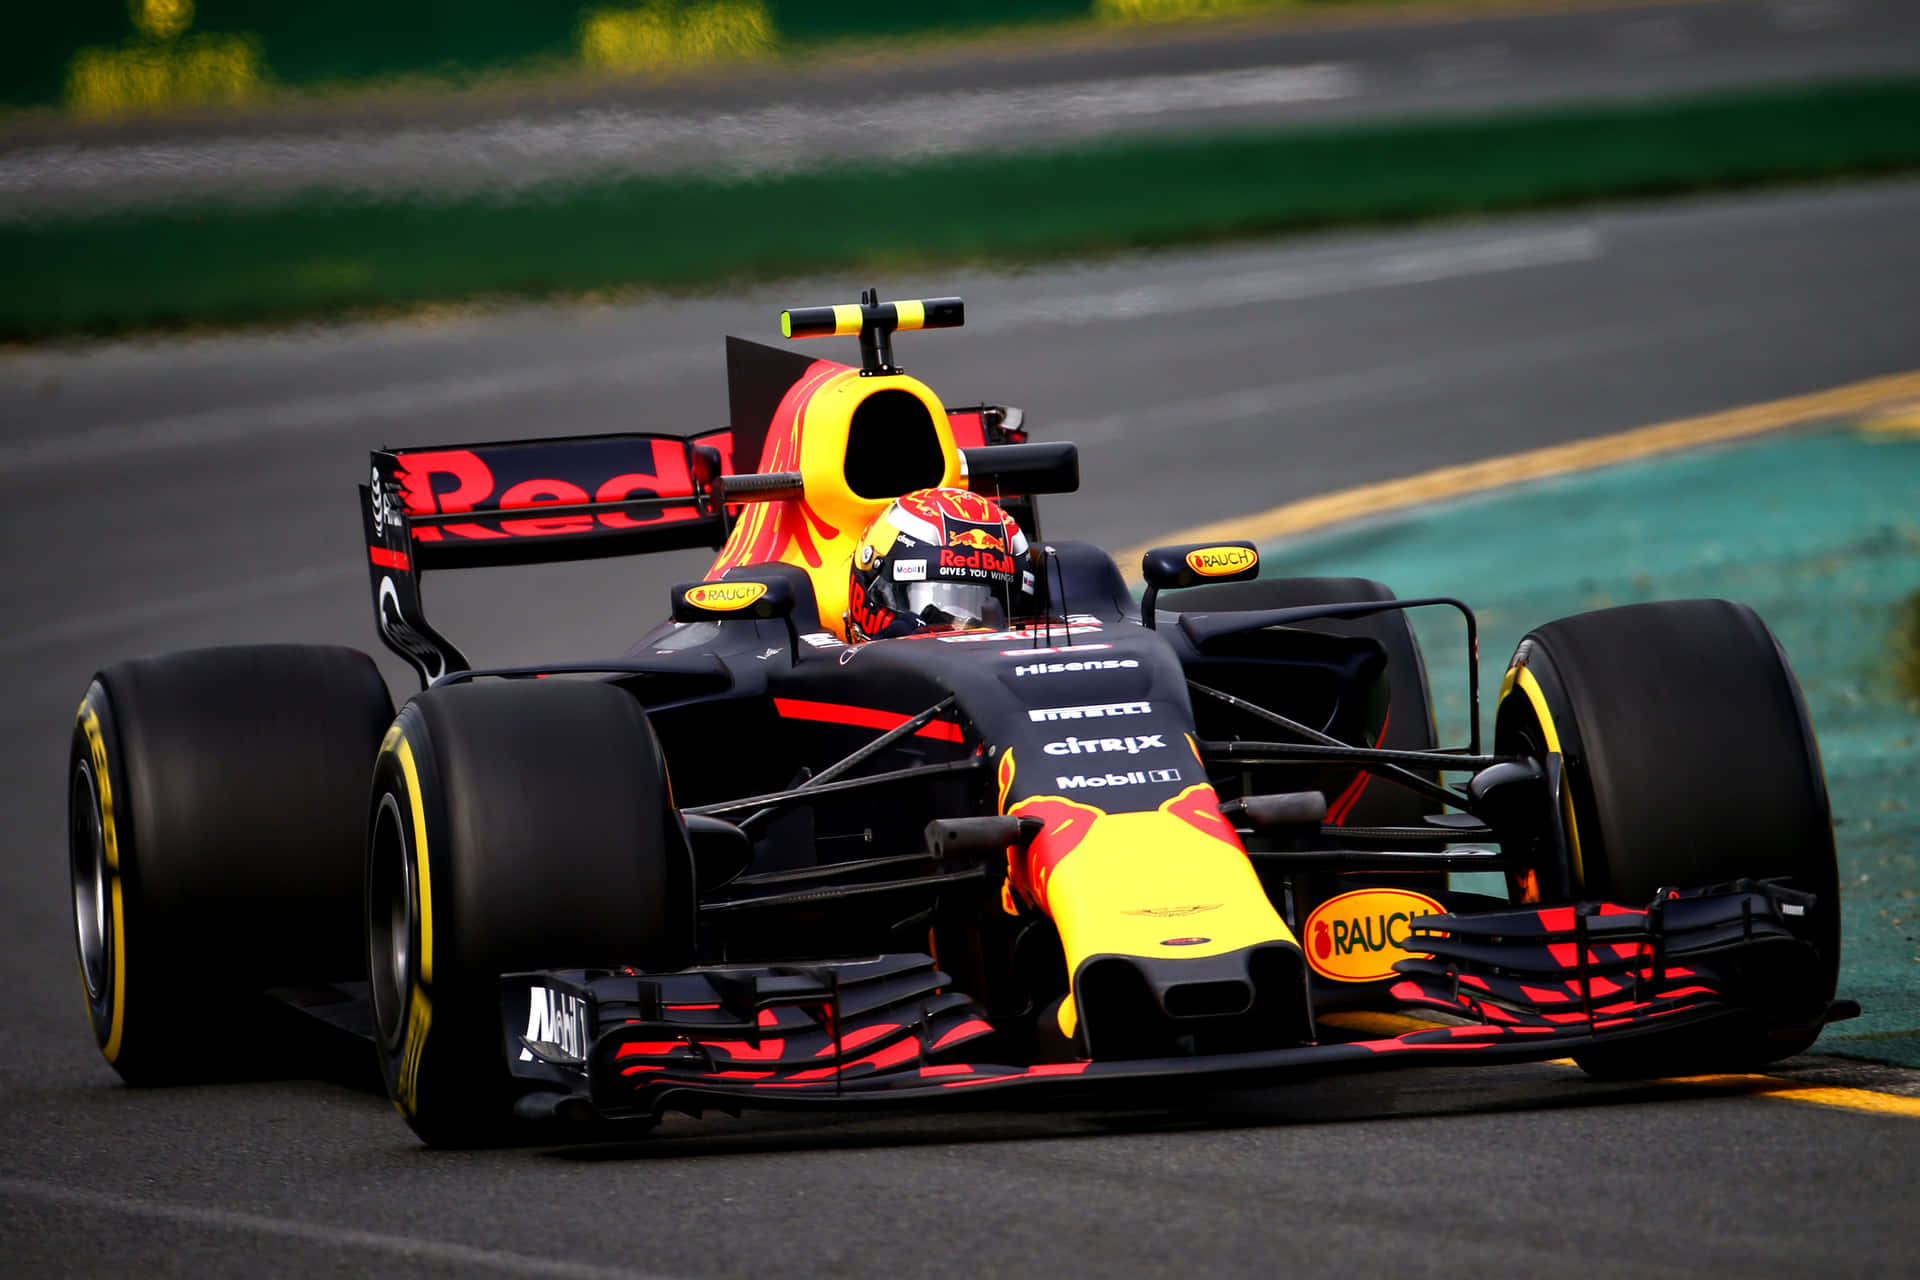 Max Verstappen in action on the race track